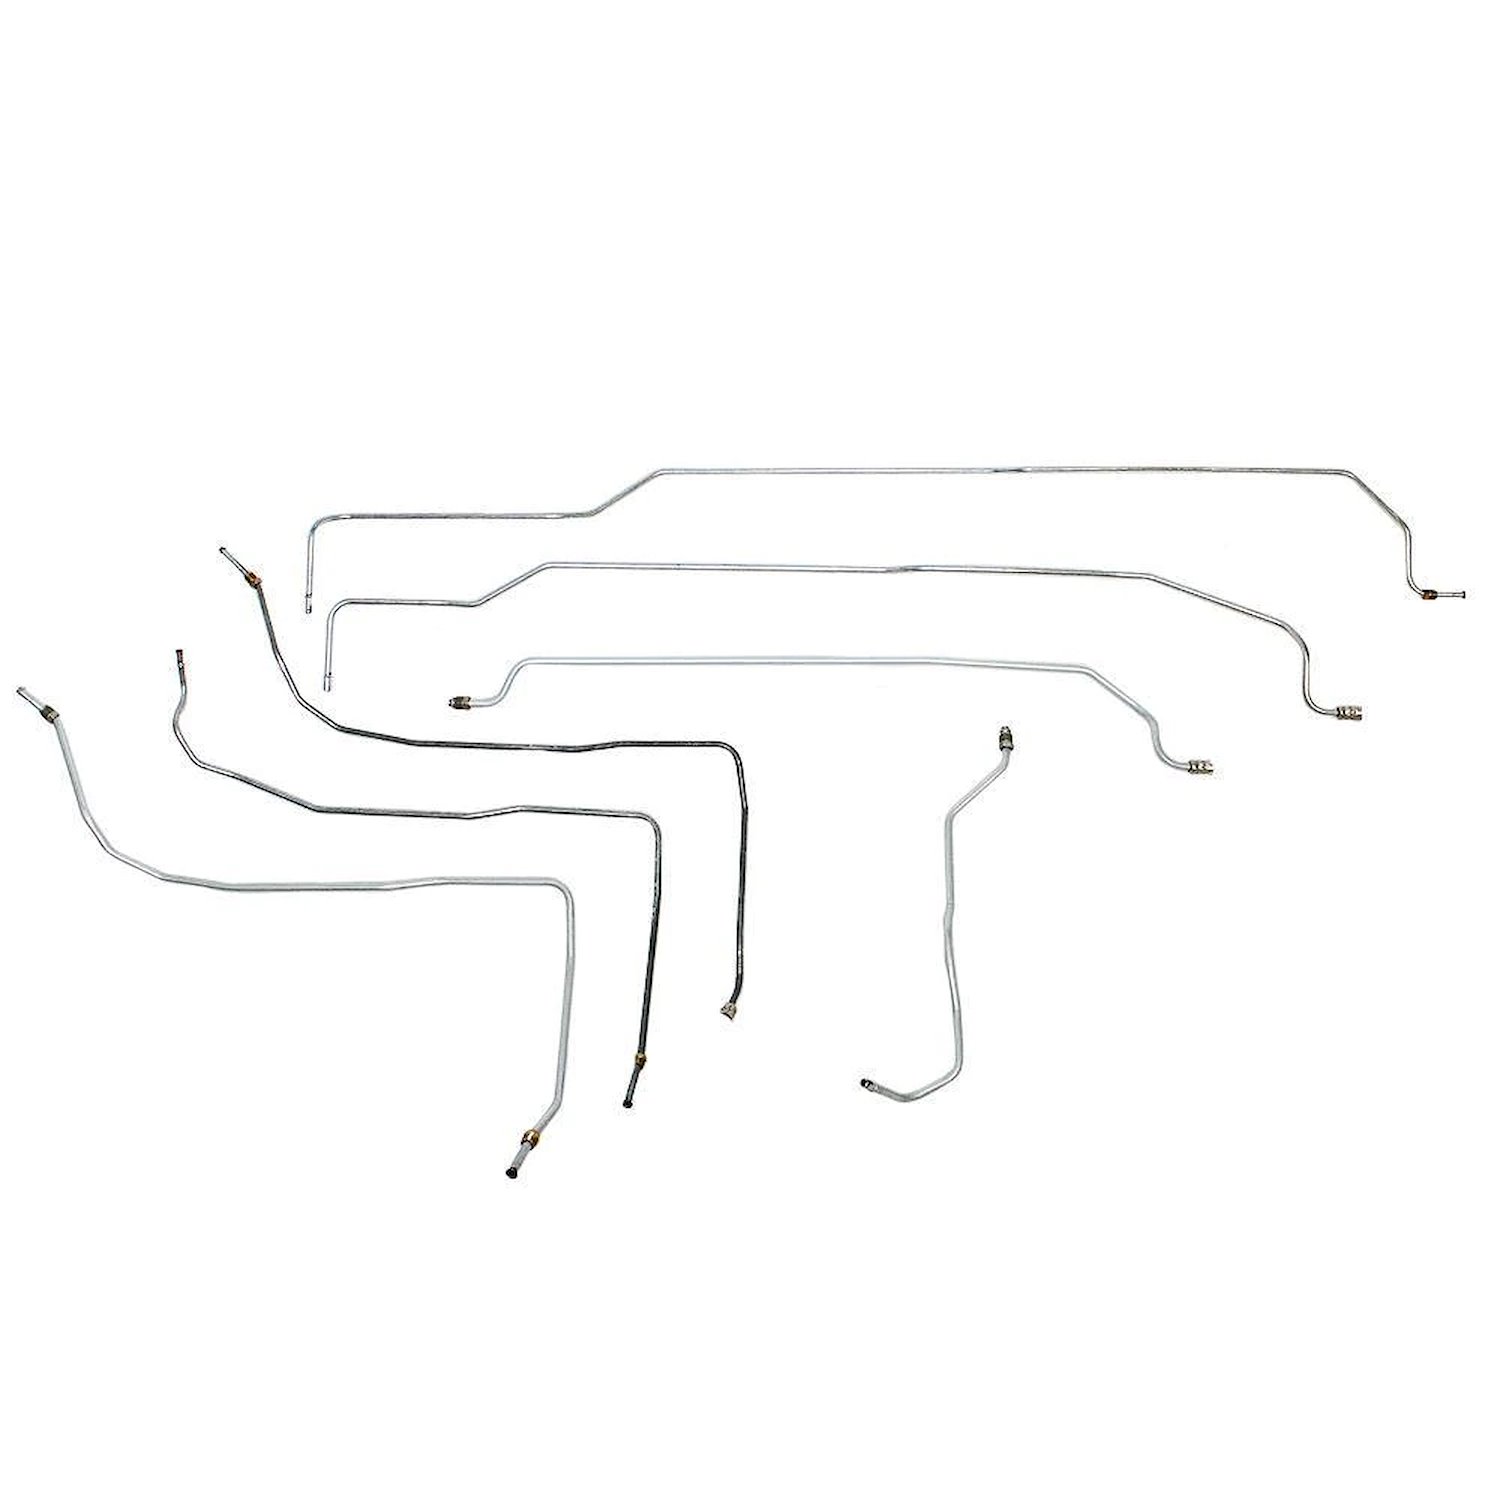 Complete Fuel Line Kit for 2001-2003 GM 2500HD/3500